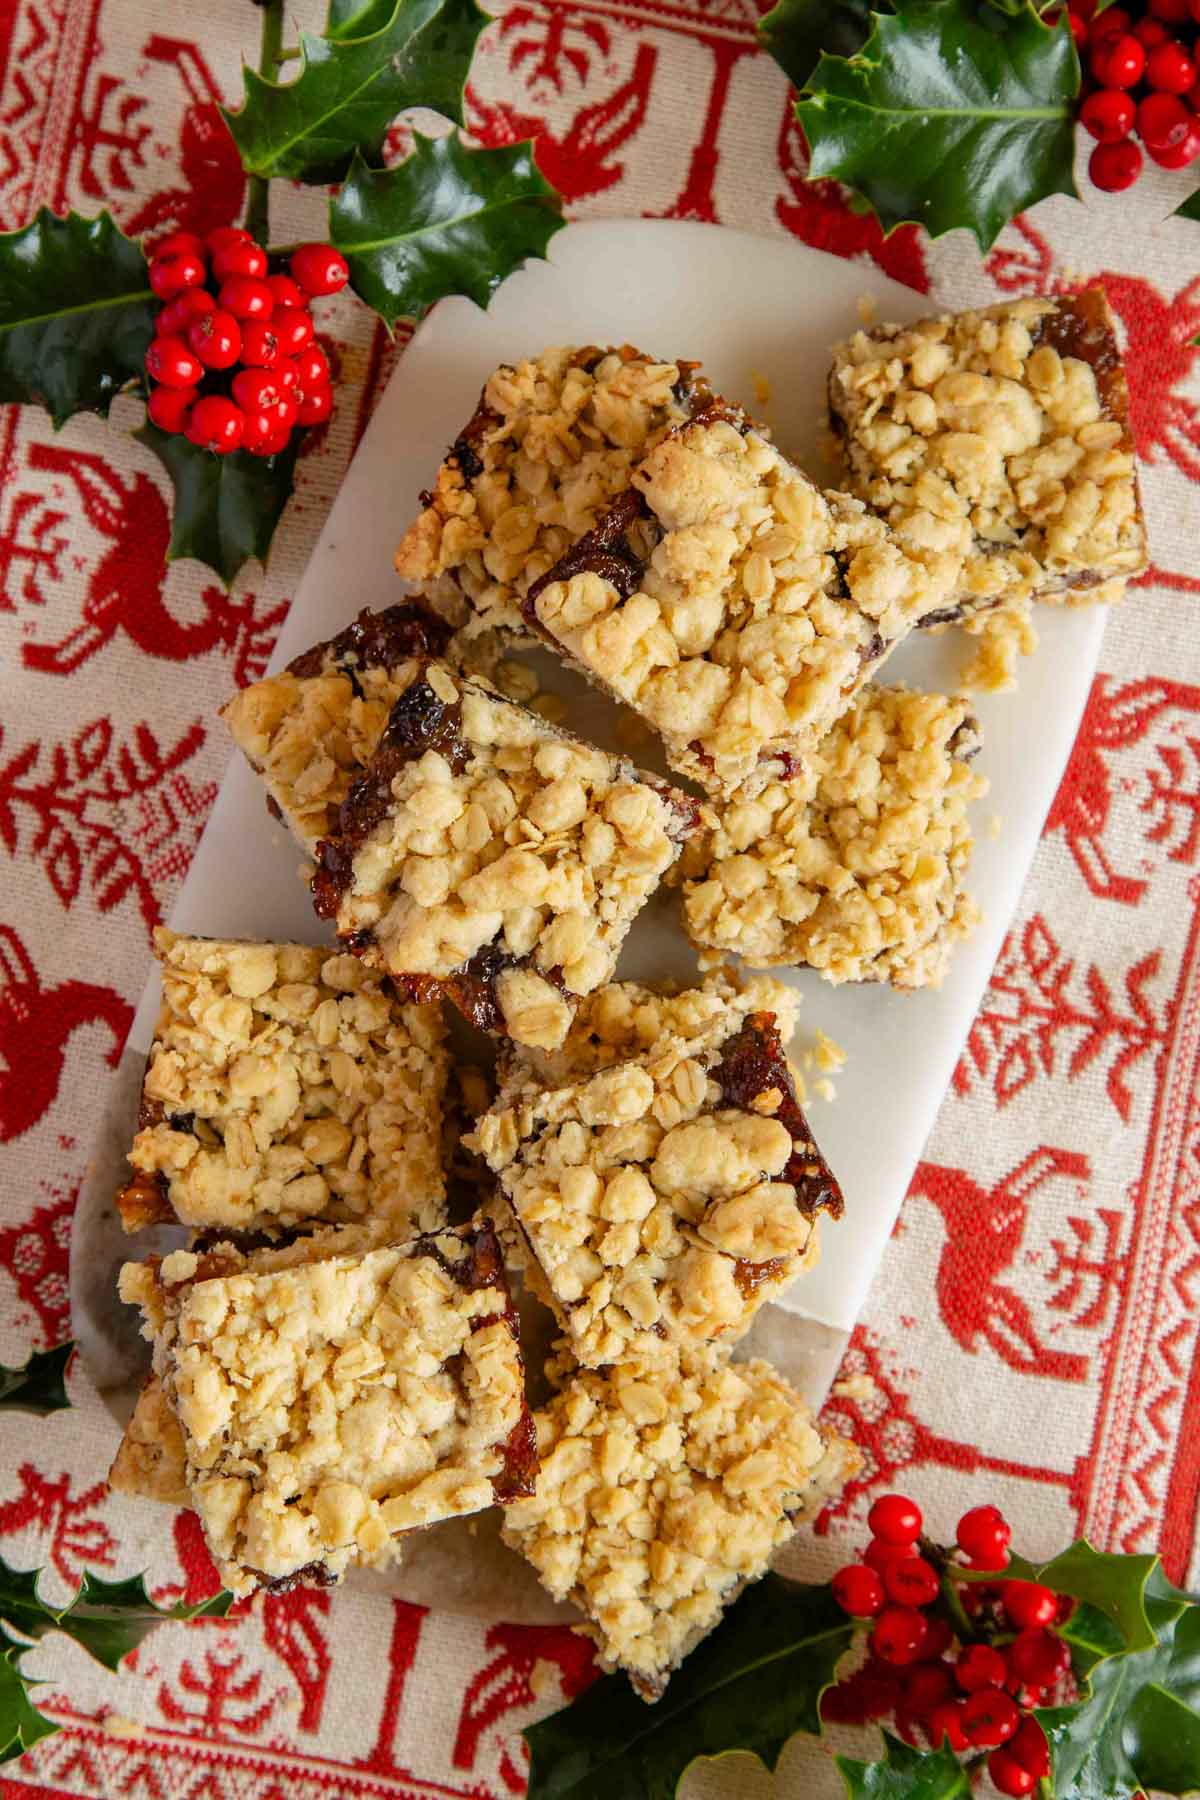 mincemeat crumble bars laid out on a marble board on a festive Scandinavian style embroidered cloth.